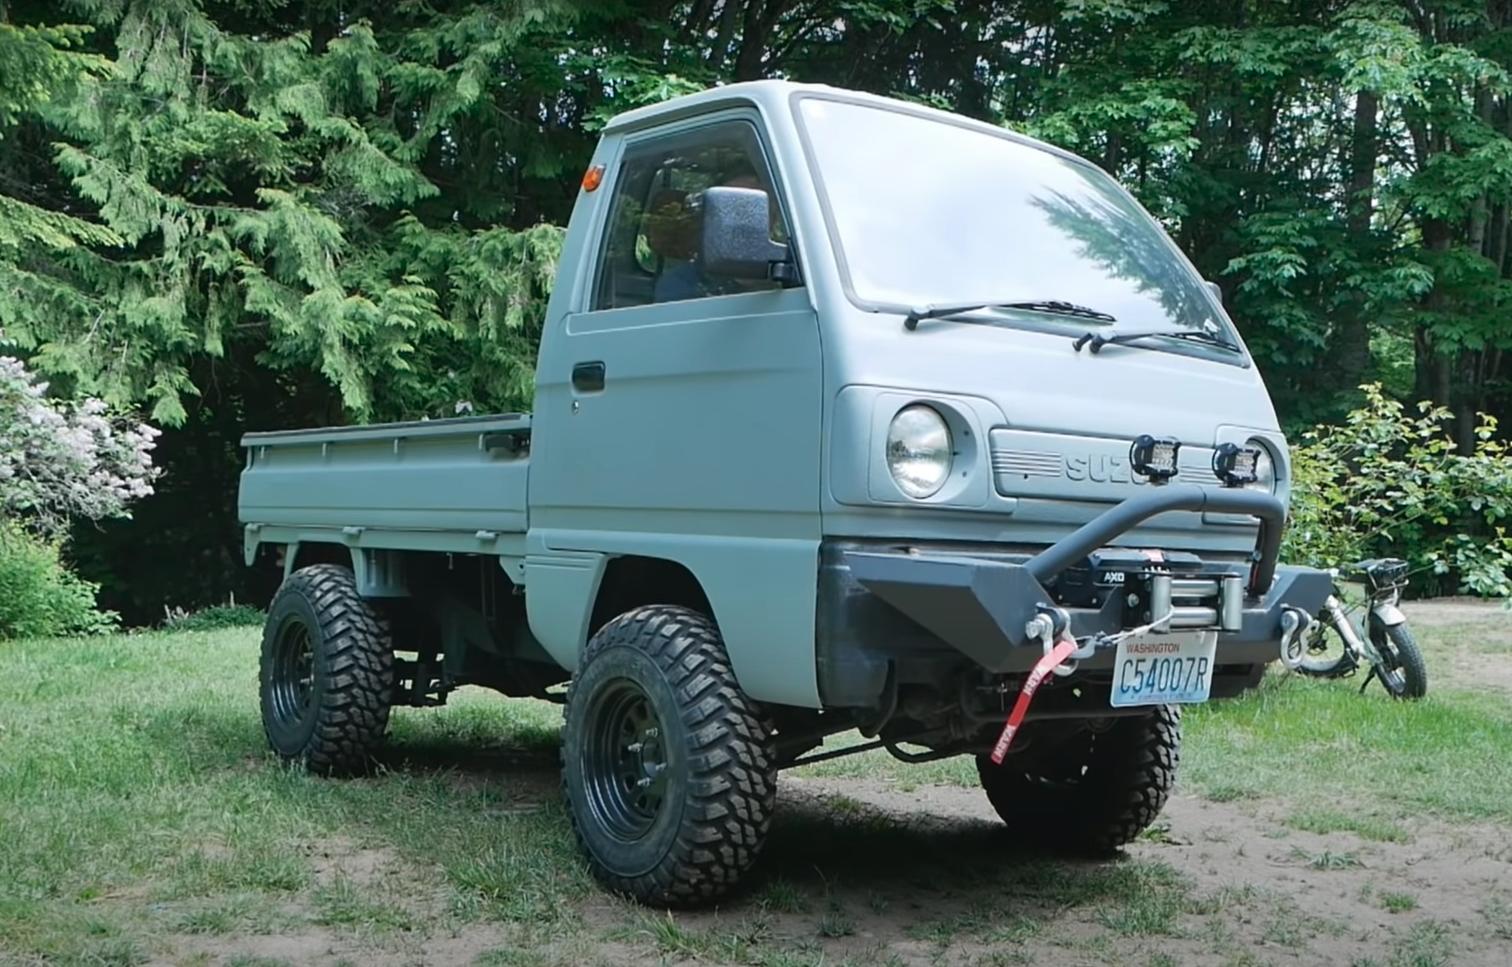 Is a Kei truck worth the investment? Here's what folks have to say about them